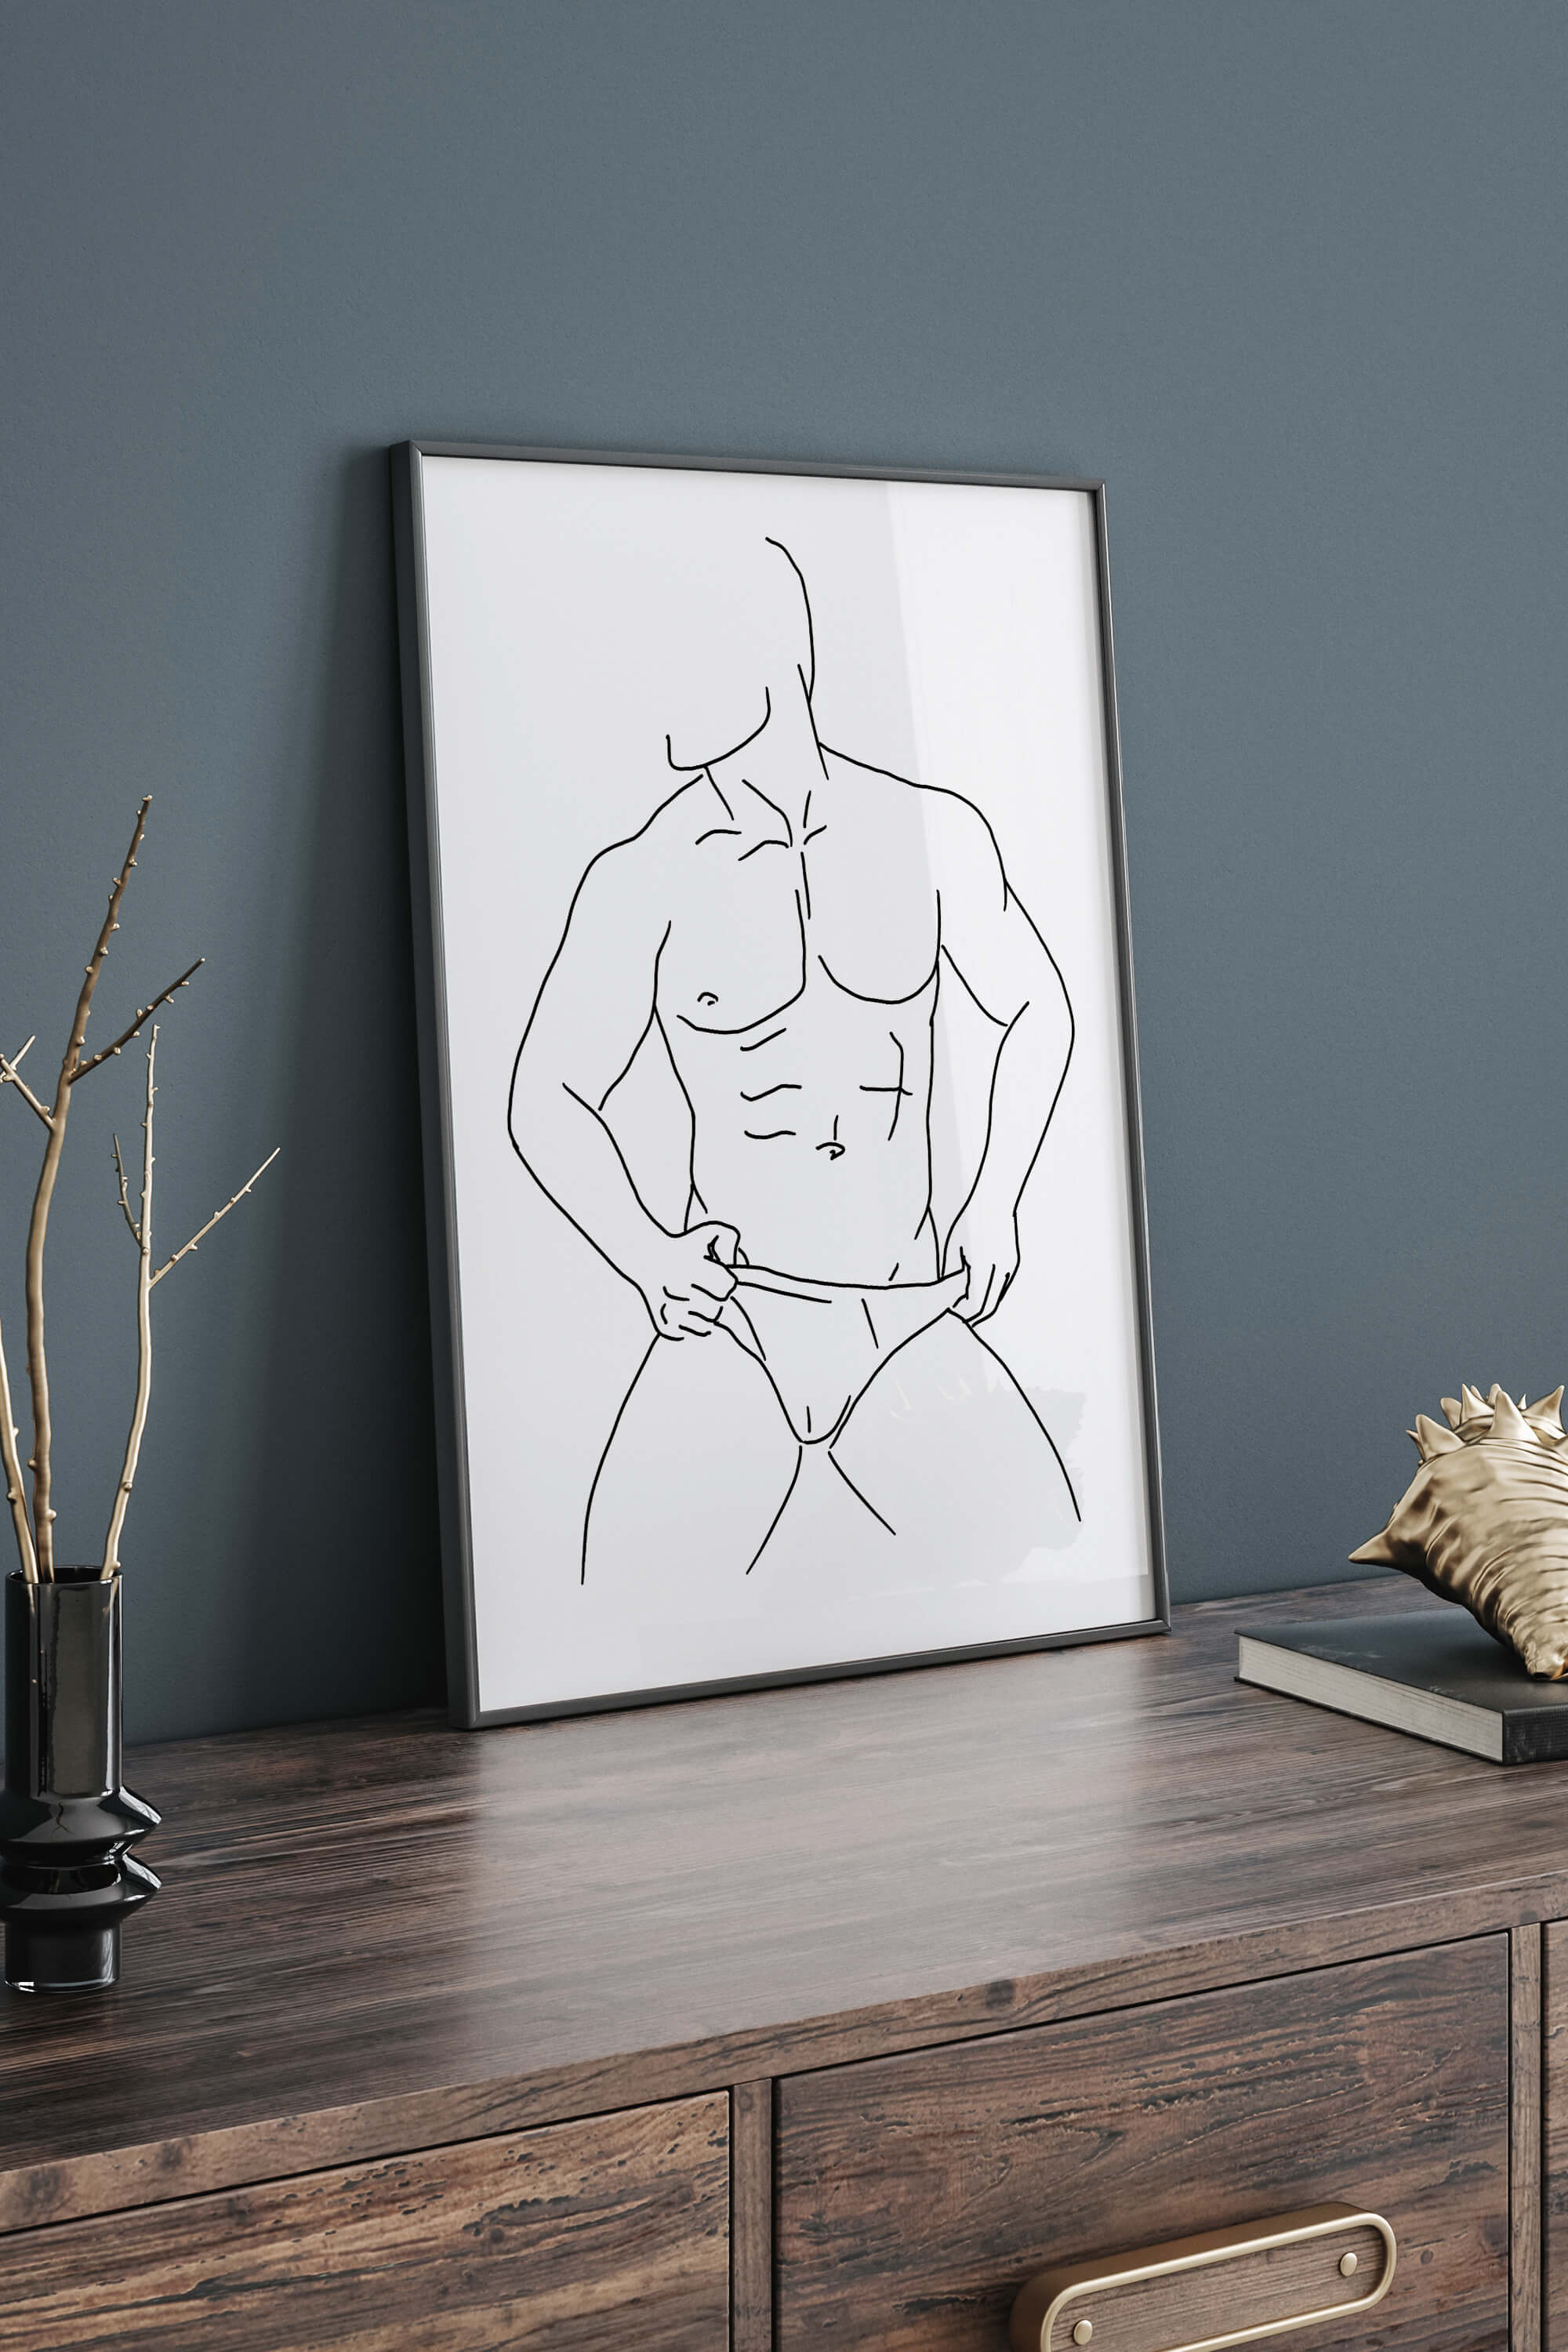 Elevate your space with this gay wall decor, showcasing sensual male line art in striking monochrome. Let the subtle details and artistic composition become a focal point of your surroundings.